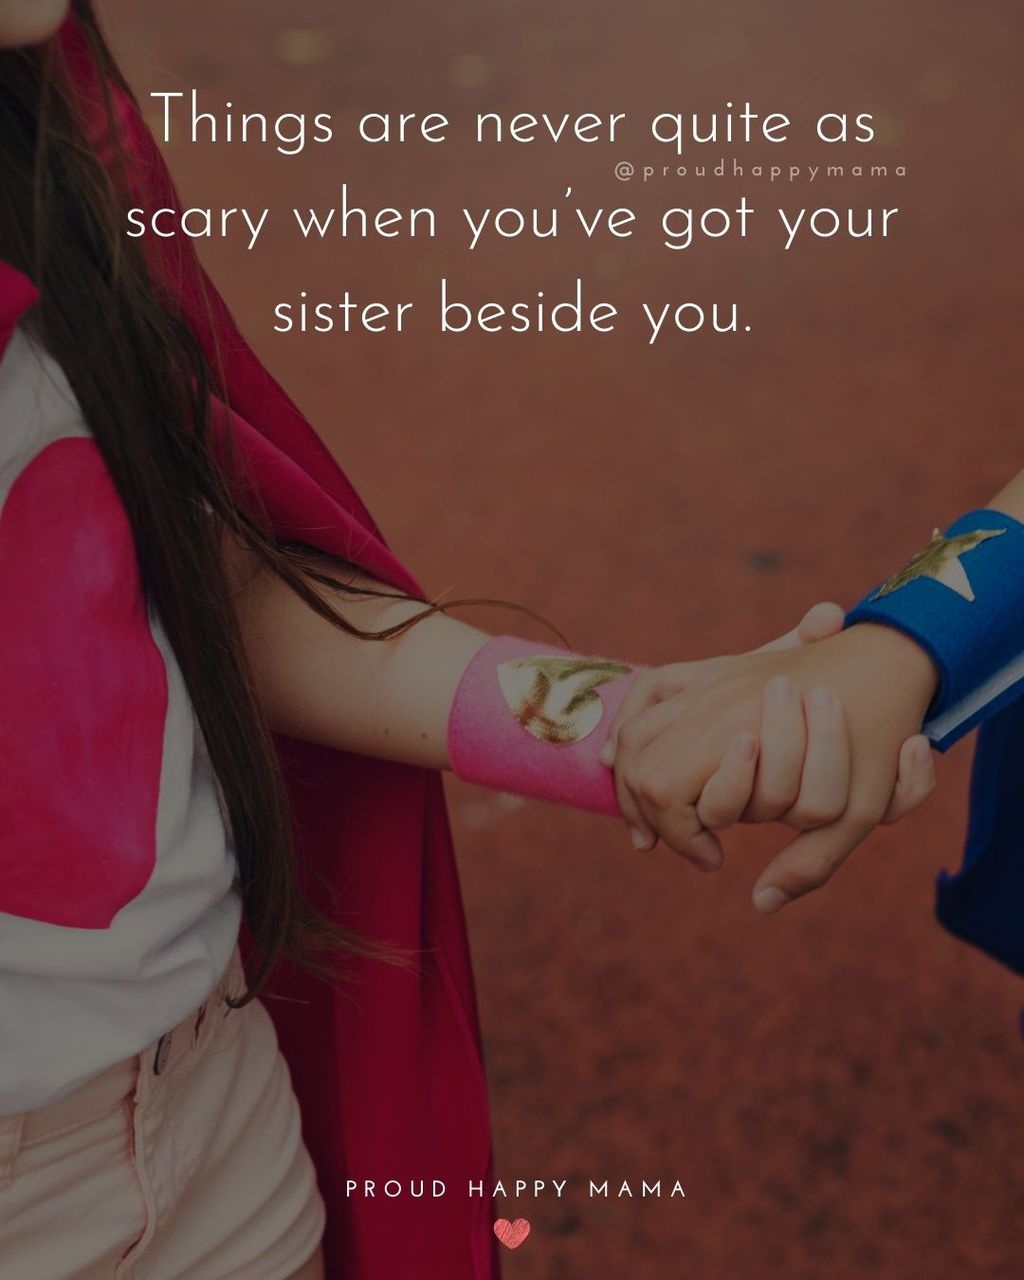 Sister Quotes - Things are never quite as scary when you’ve got your sister beside you.